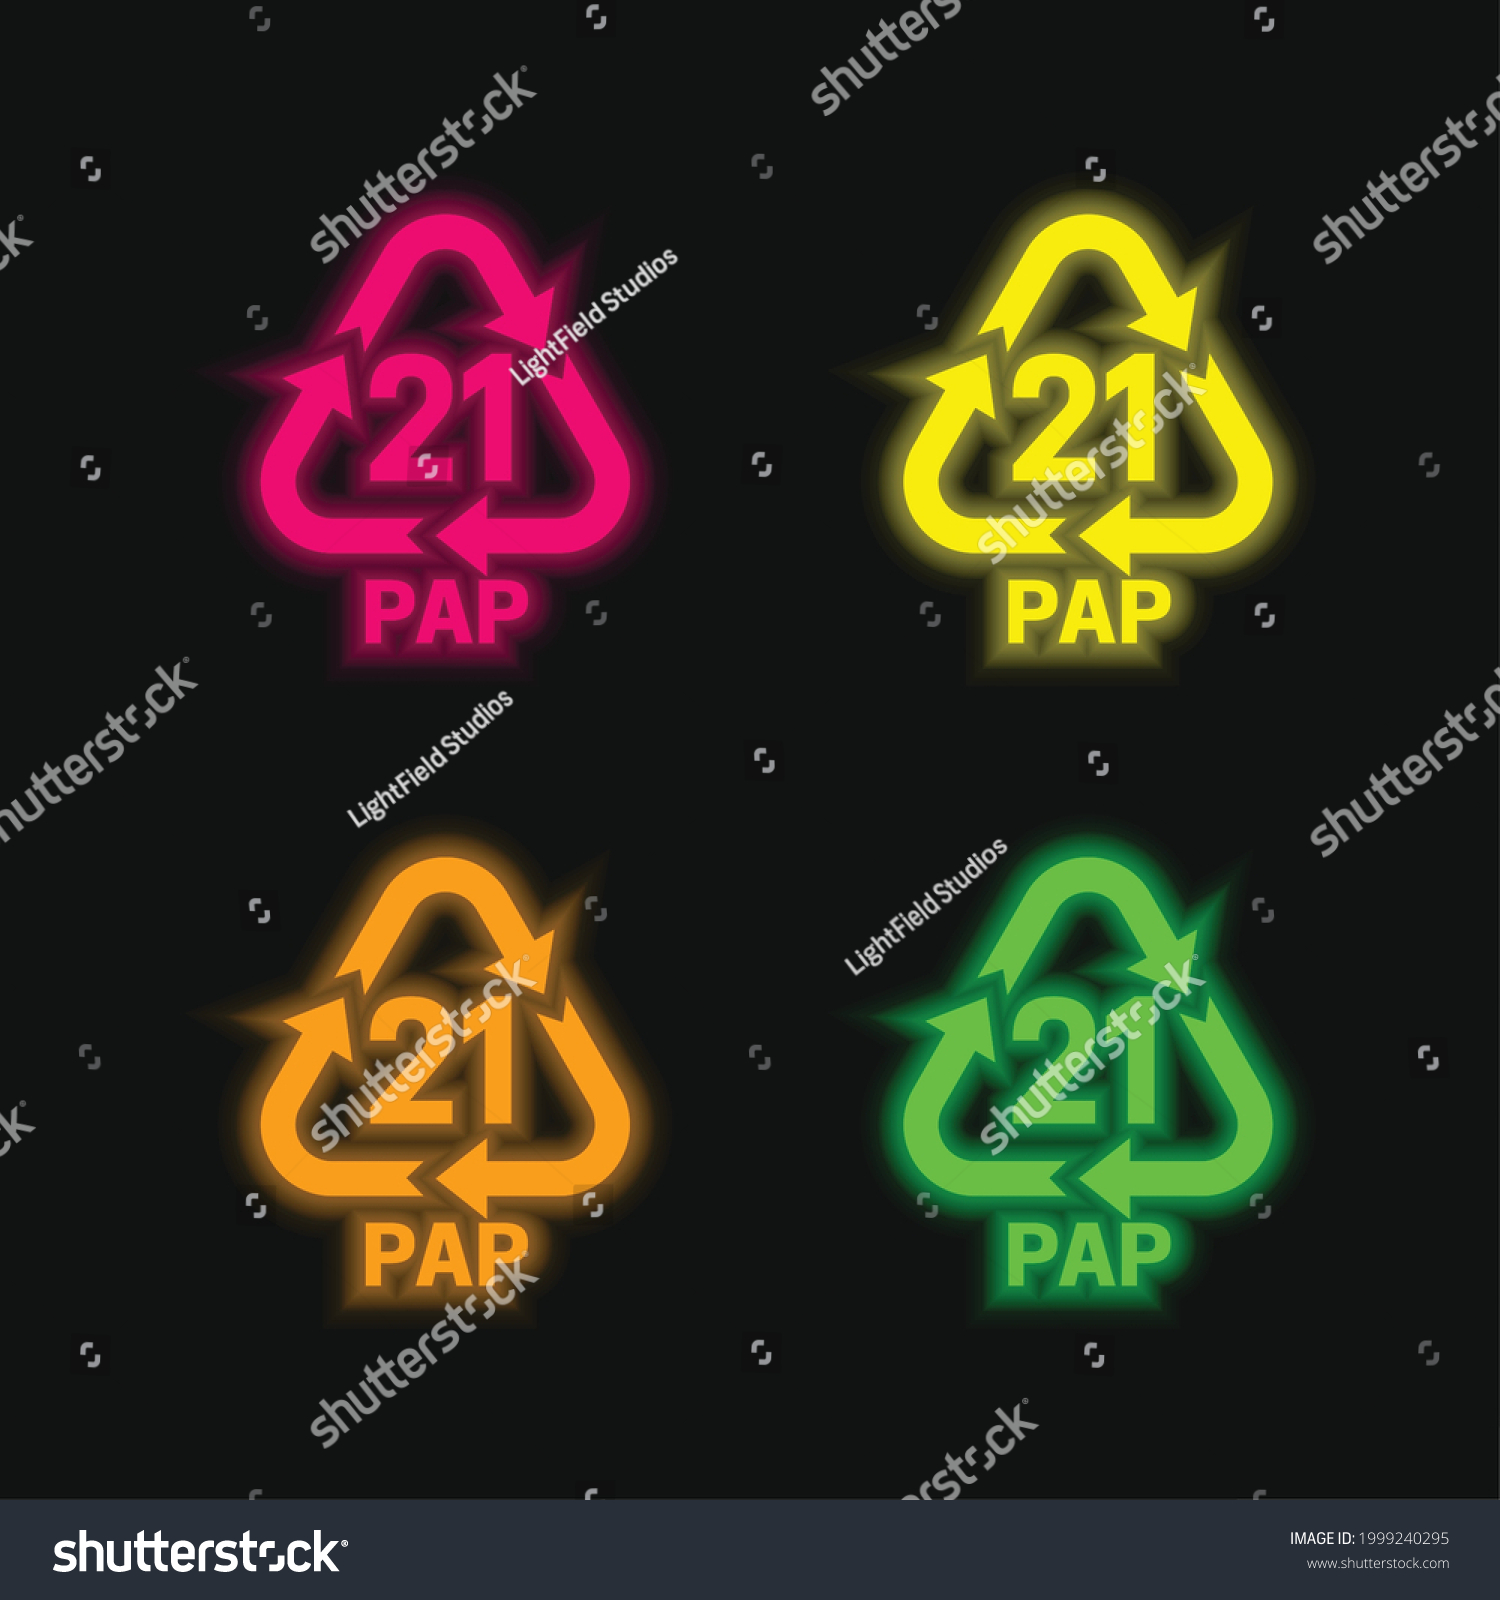 SVG of 21 PAP four color glowing neon vector icon svg